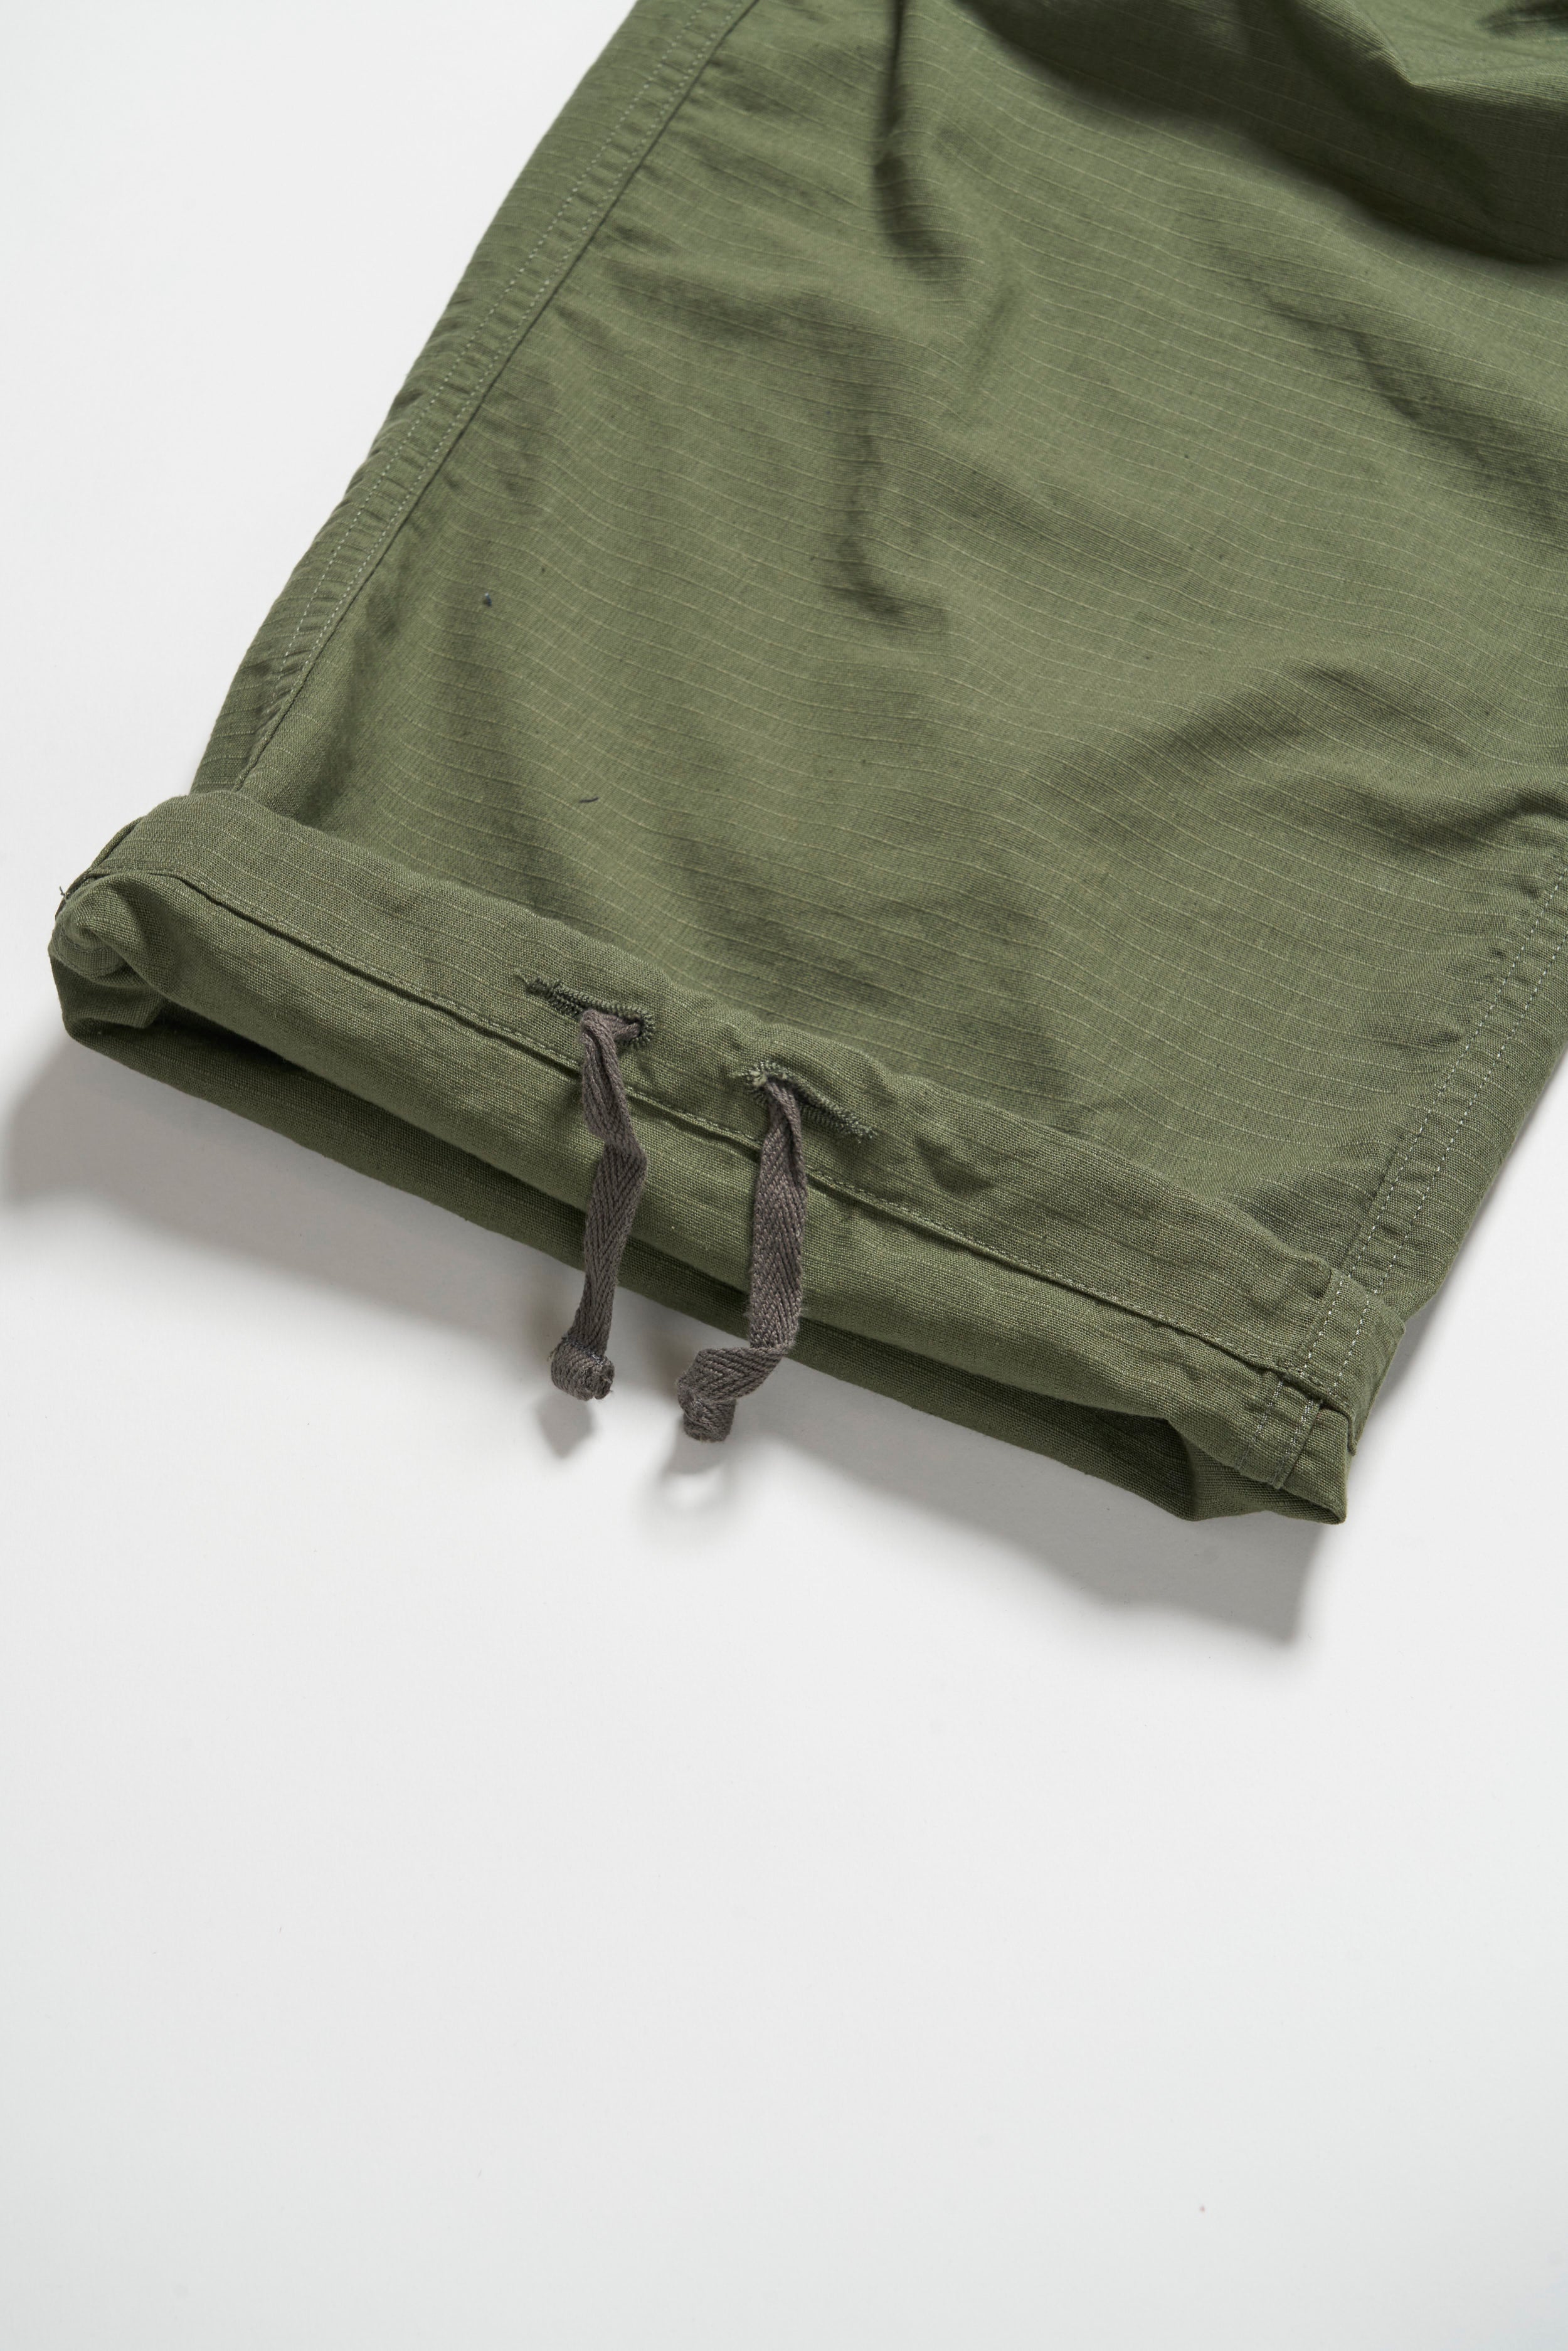 Over Pant - Olive Cotton Ripstop